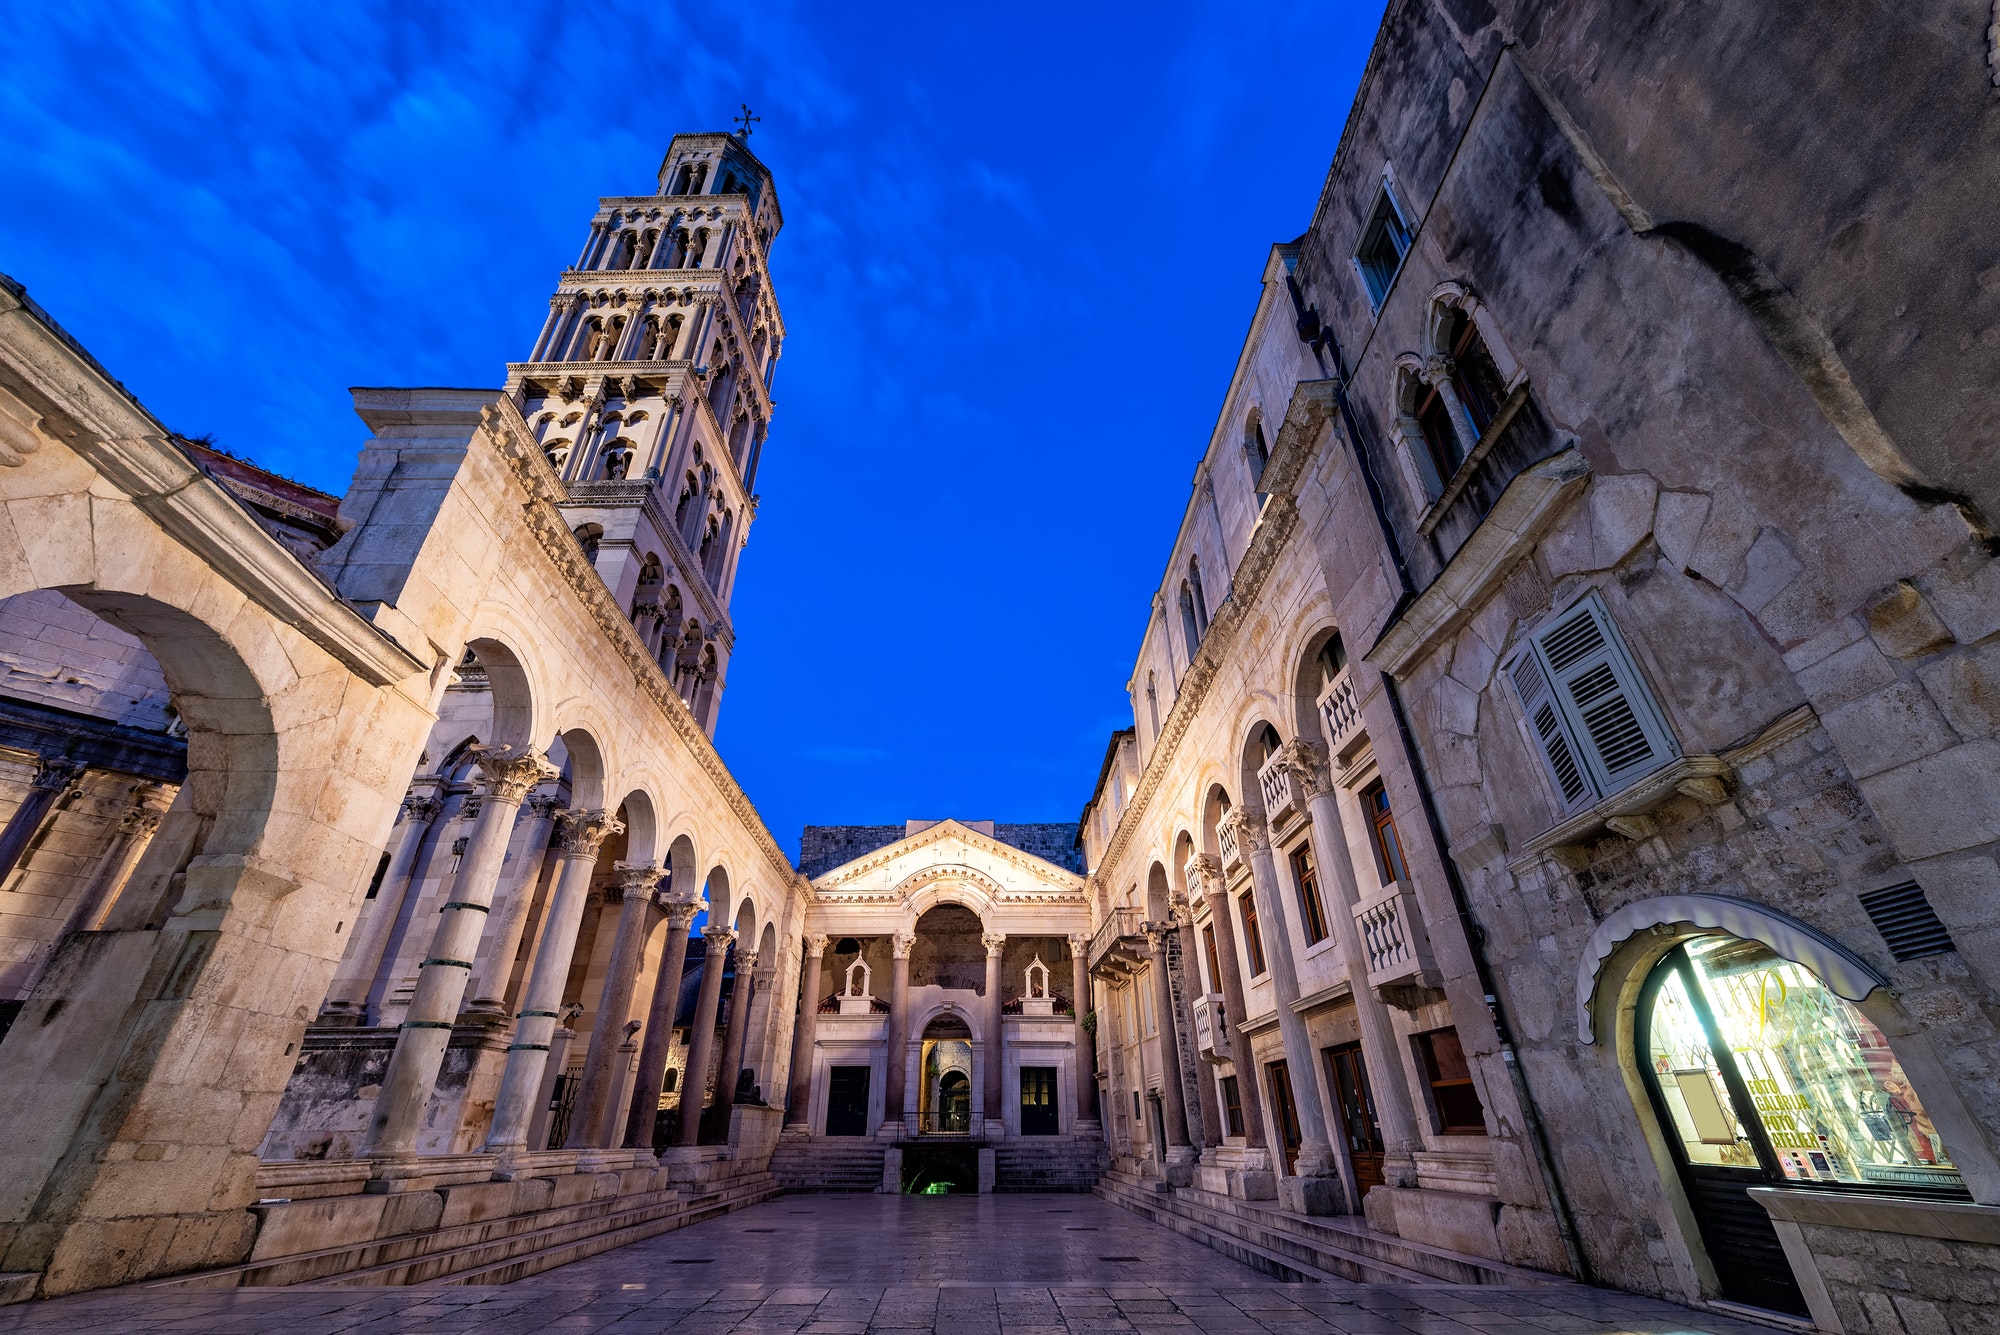 Blue hour view of Diocletian's Palace in Split, Croatia.